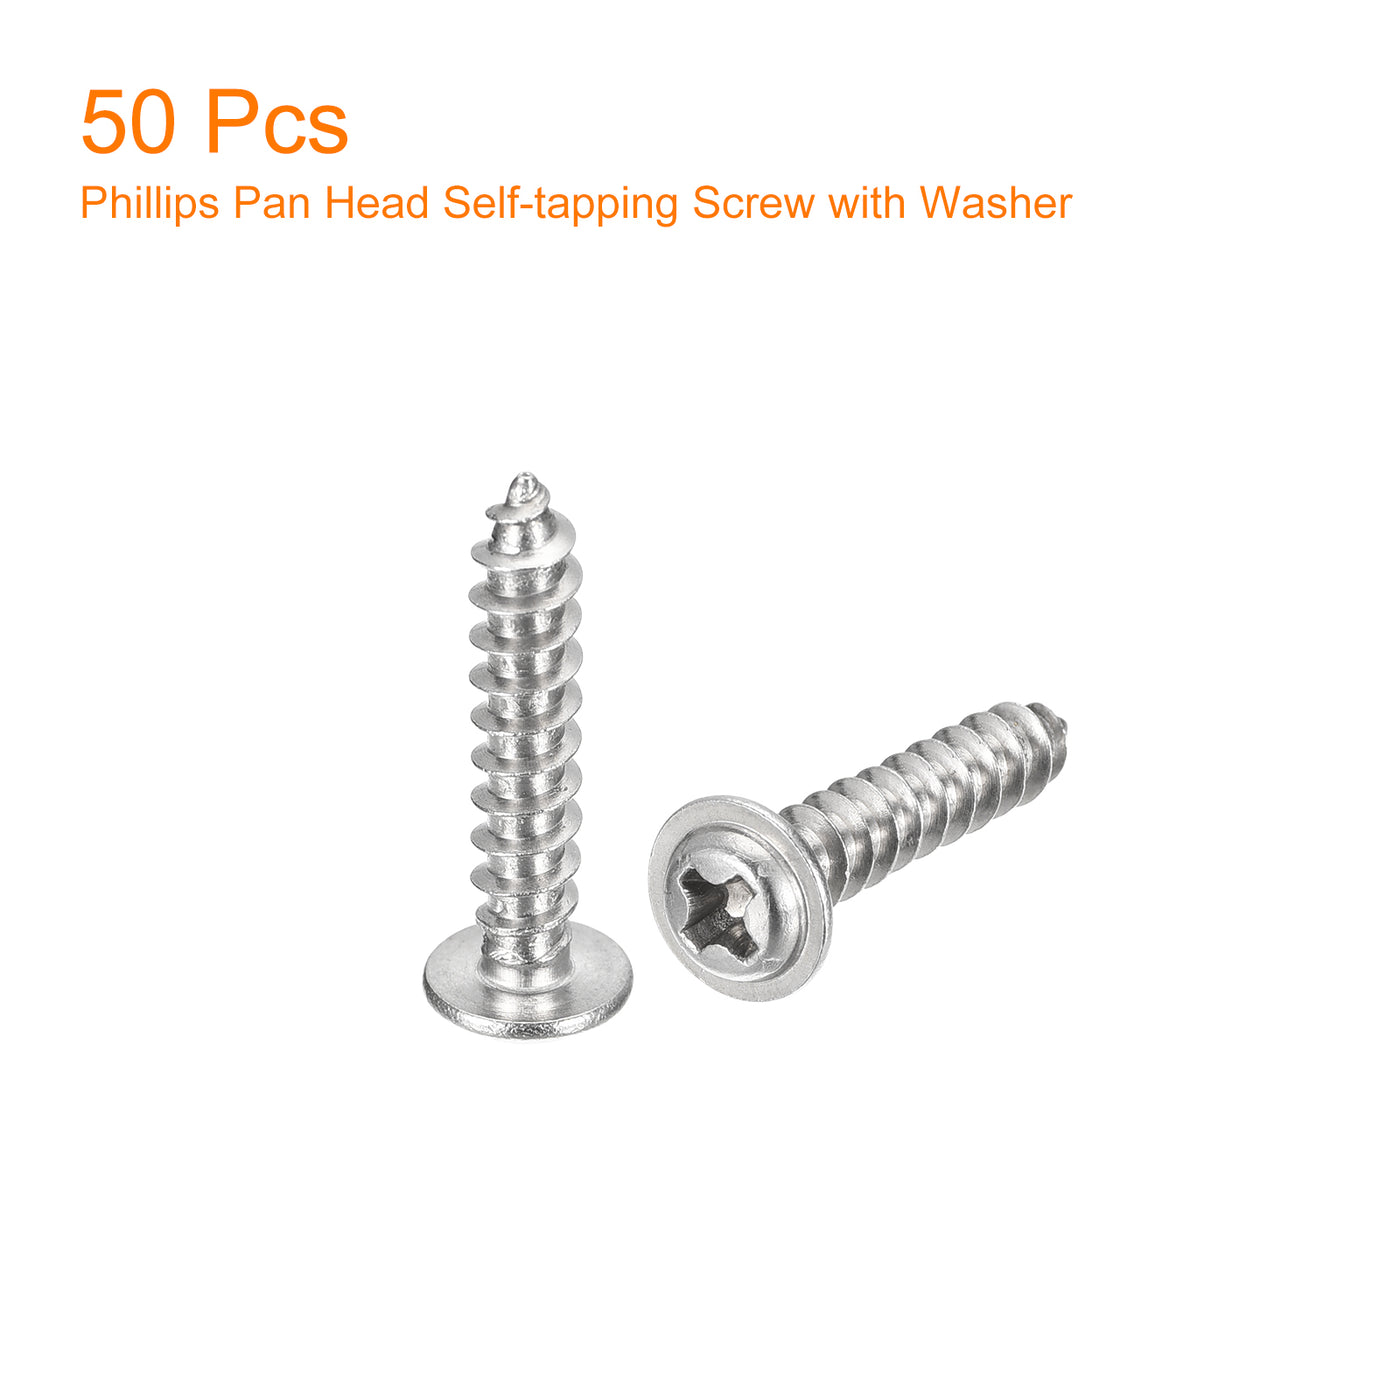 uxcell Uxcell ST4x20mm Phillips Pan Head Self-tapping Screw with Washer, 50pcs - 304 Stainless Steel Wood Screw Full Thread (Silver)